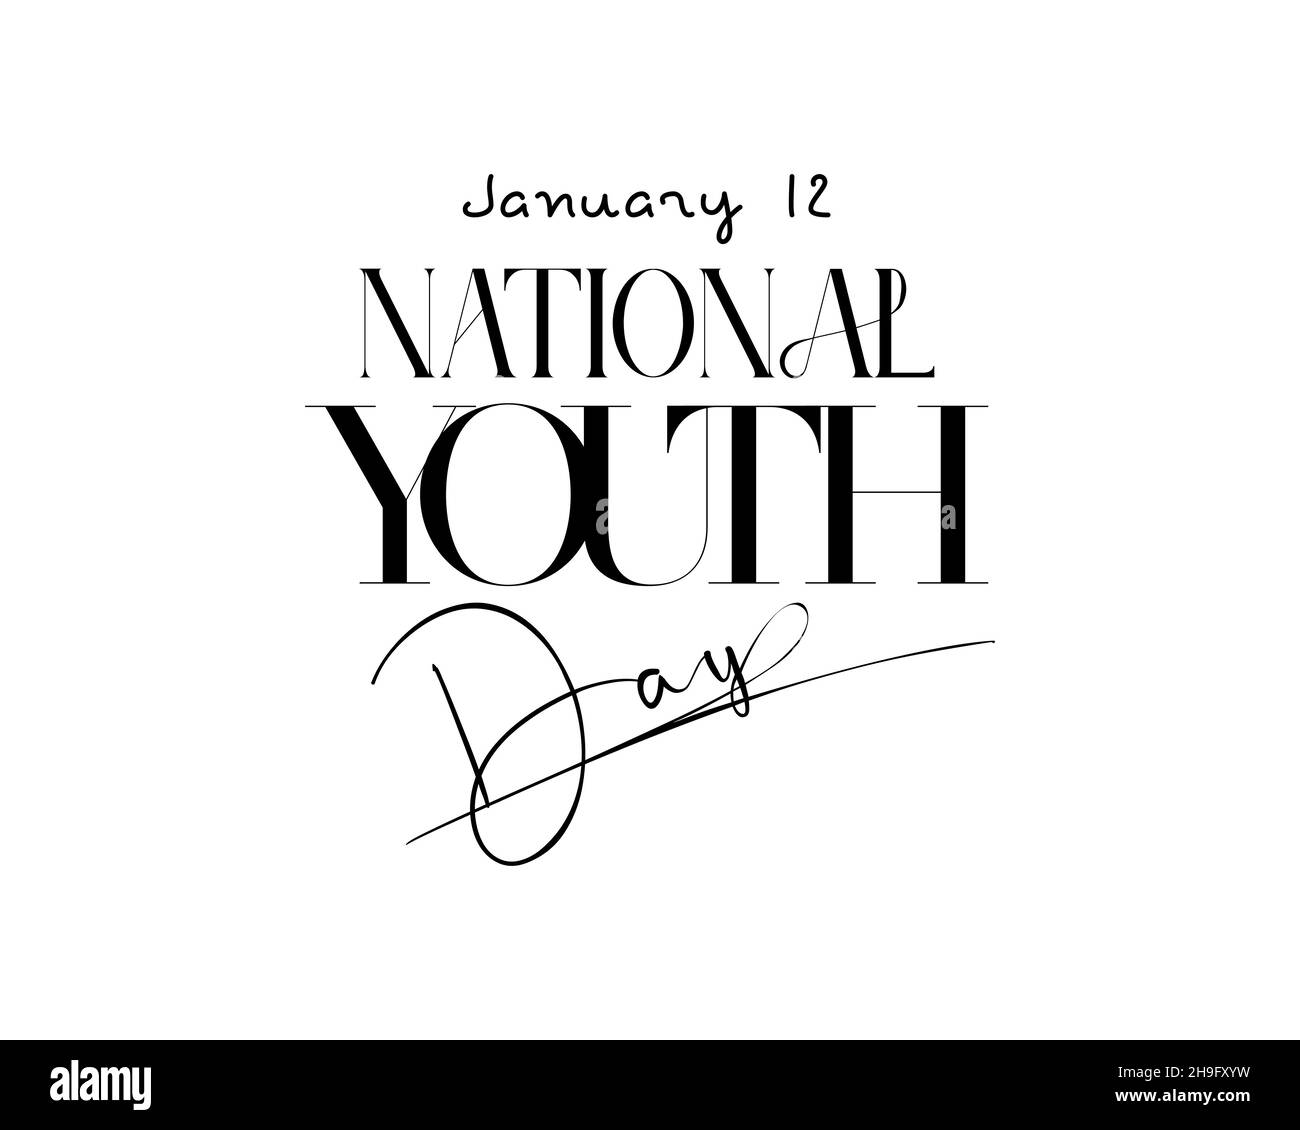 January 12 - National Youth Day. hand lettering vector design for National Youth Day. Calligraphy illustration for banner, poster, tshirt, card. Stock Vector